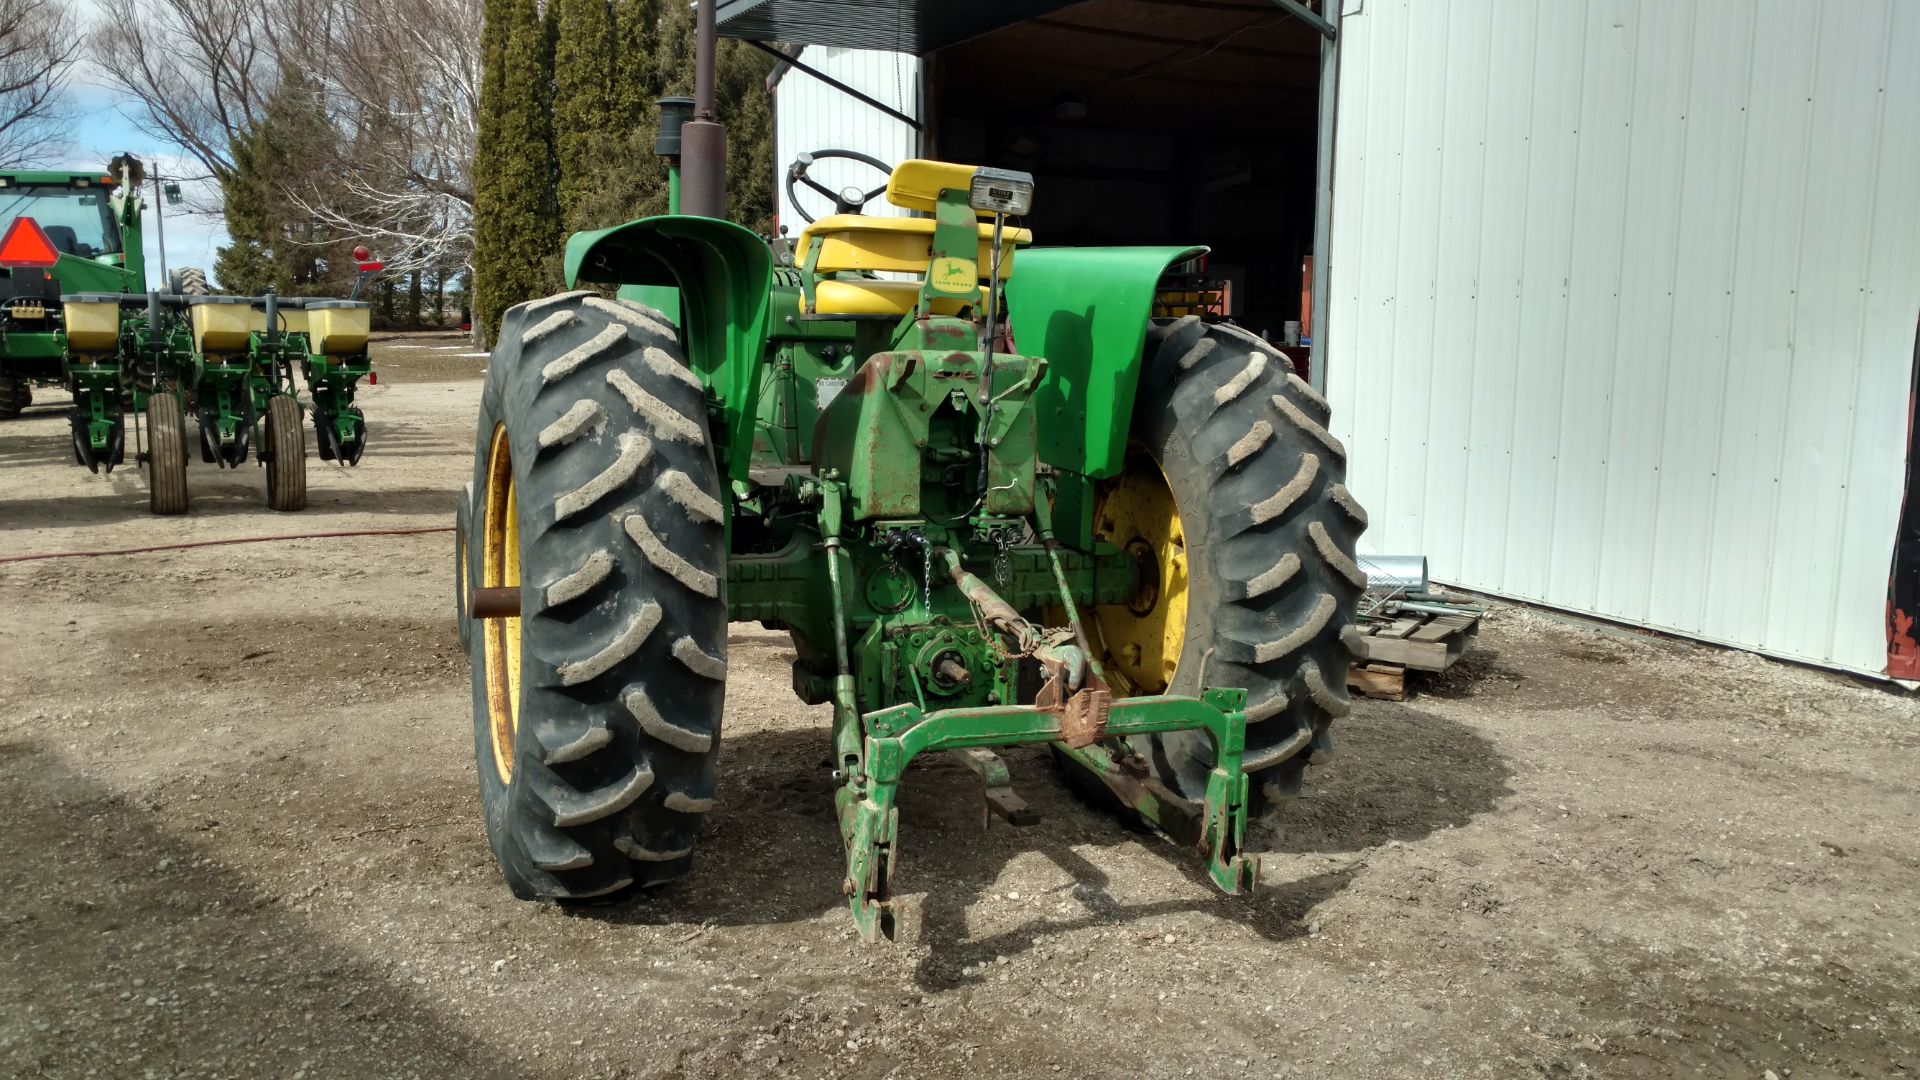 1963 JD 4010 diesel, dual hyd. outlets, 16.9/34 tires, wide front, 6300 hrs, serial # 40102T-50501; - Image 4 of 4